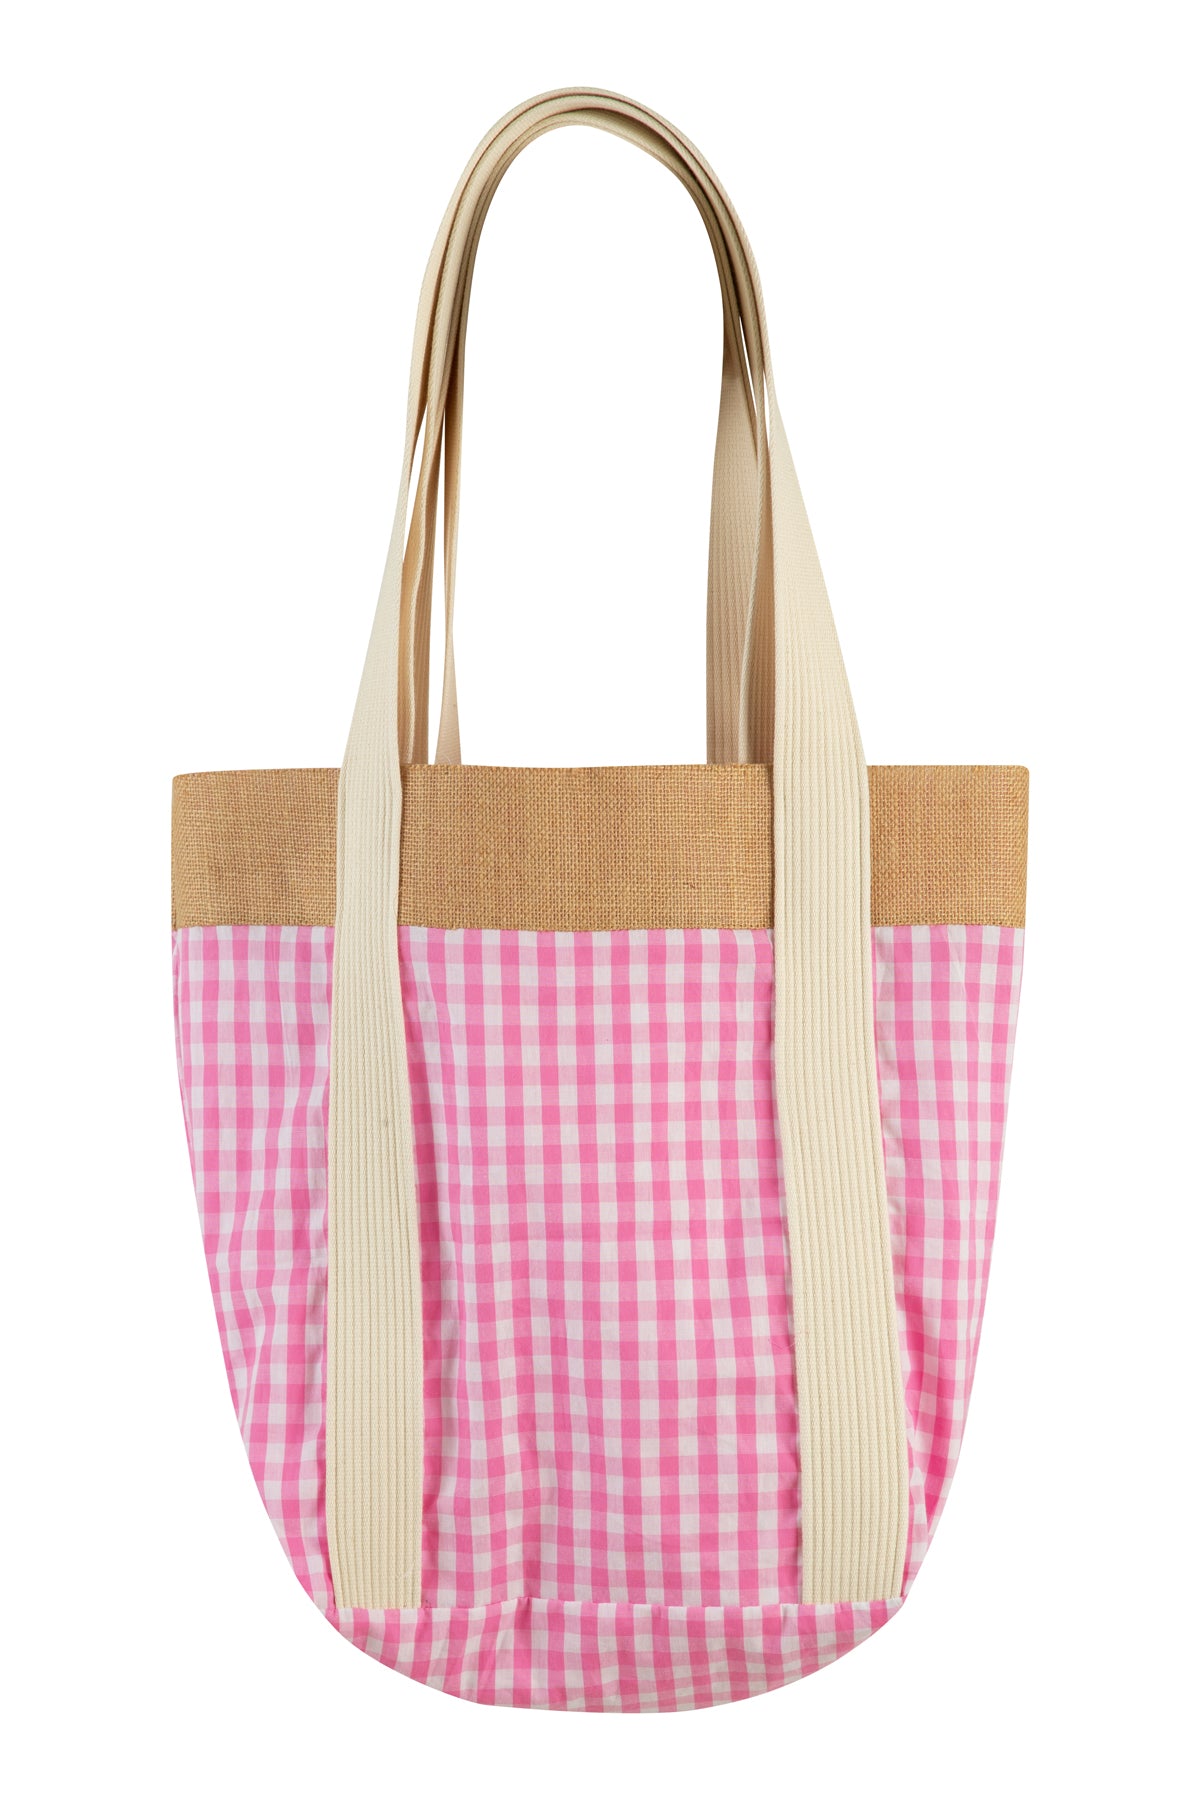 Curate by Trelise Cooper Tote-Ally Summer Bag - Pink Spot